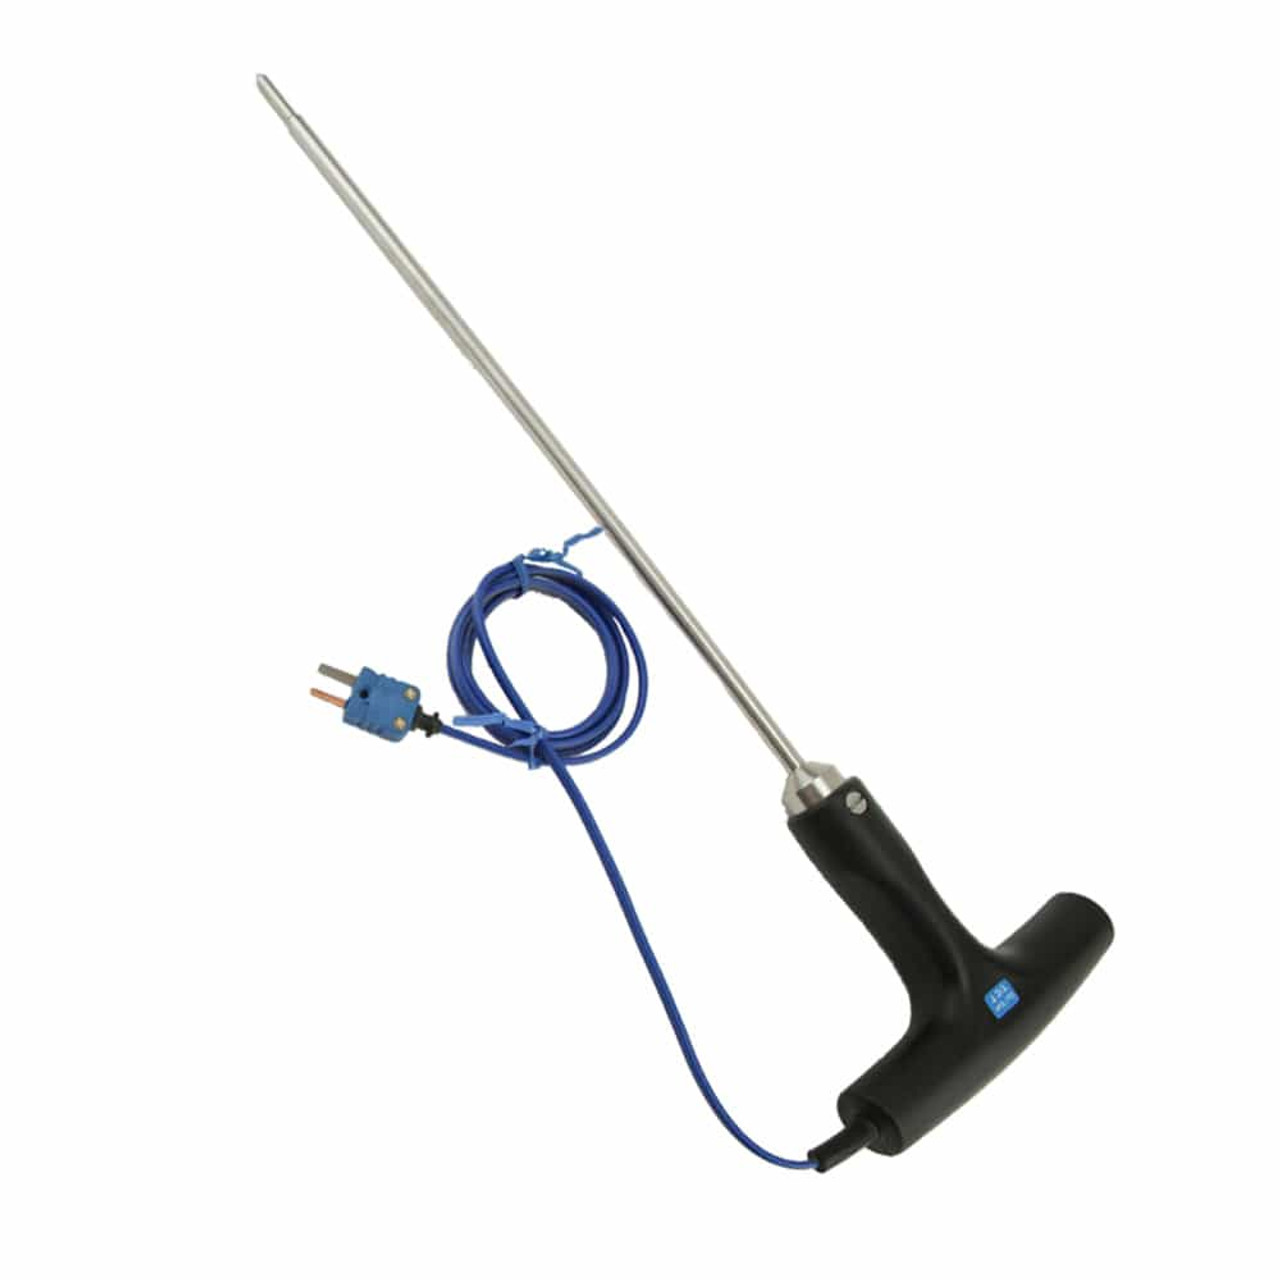  Thermoworks Replacement Probe